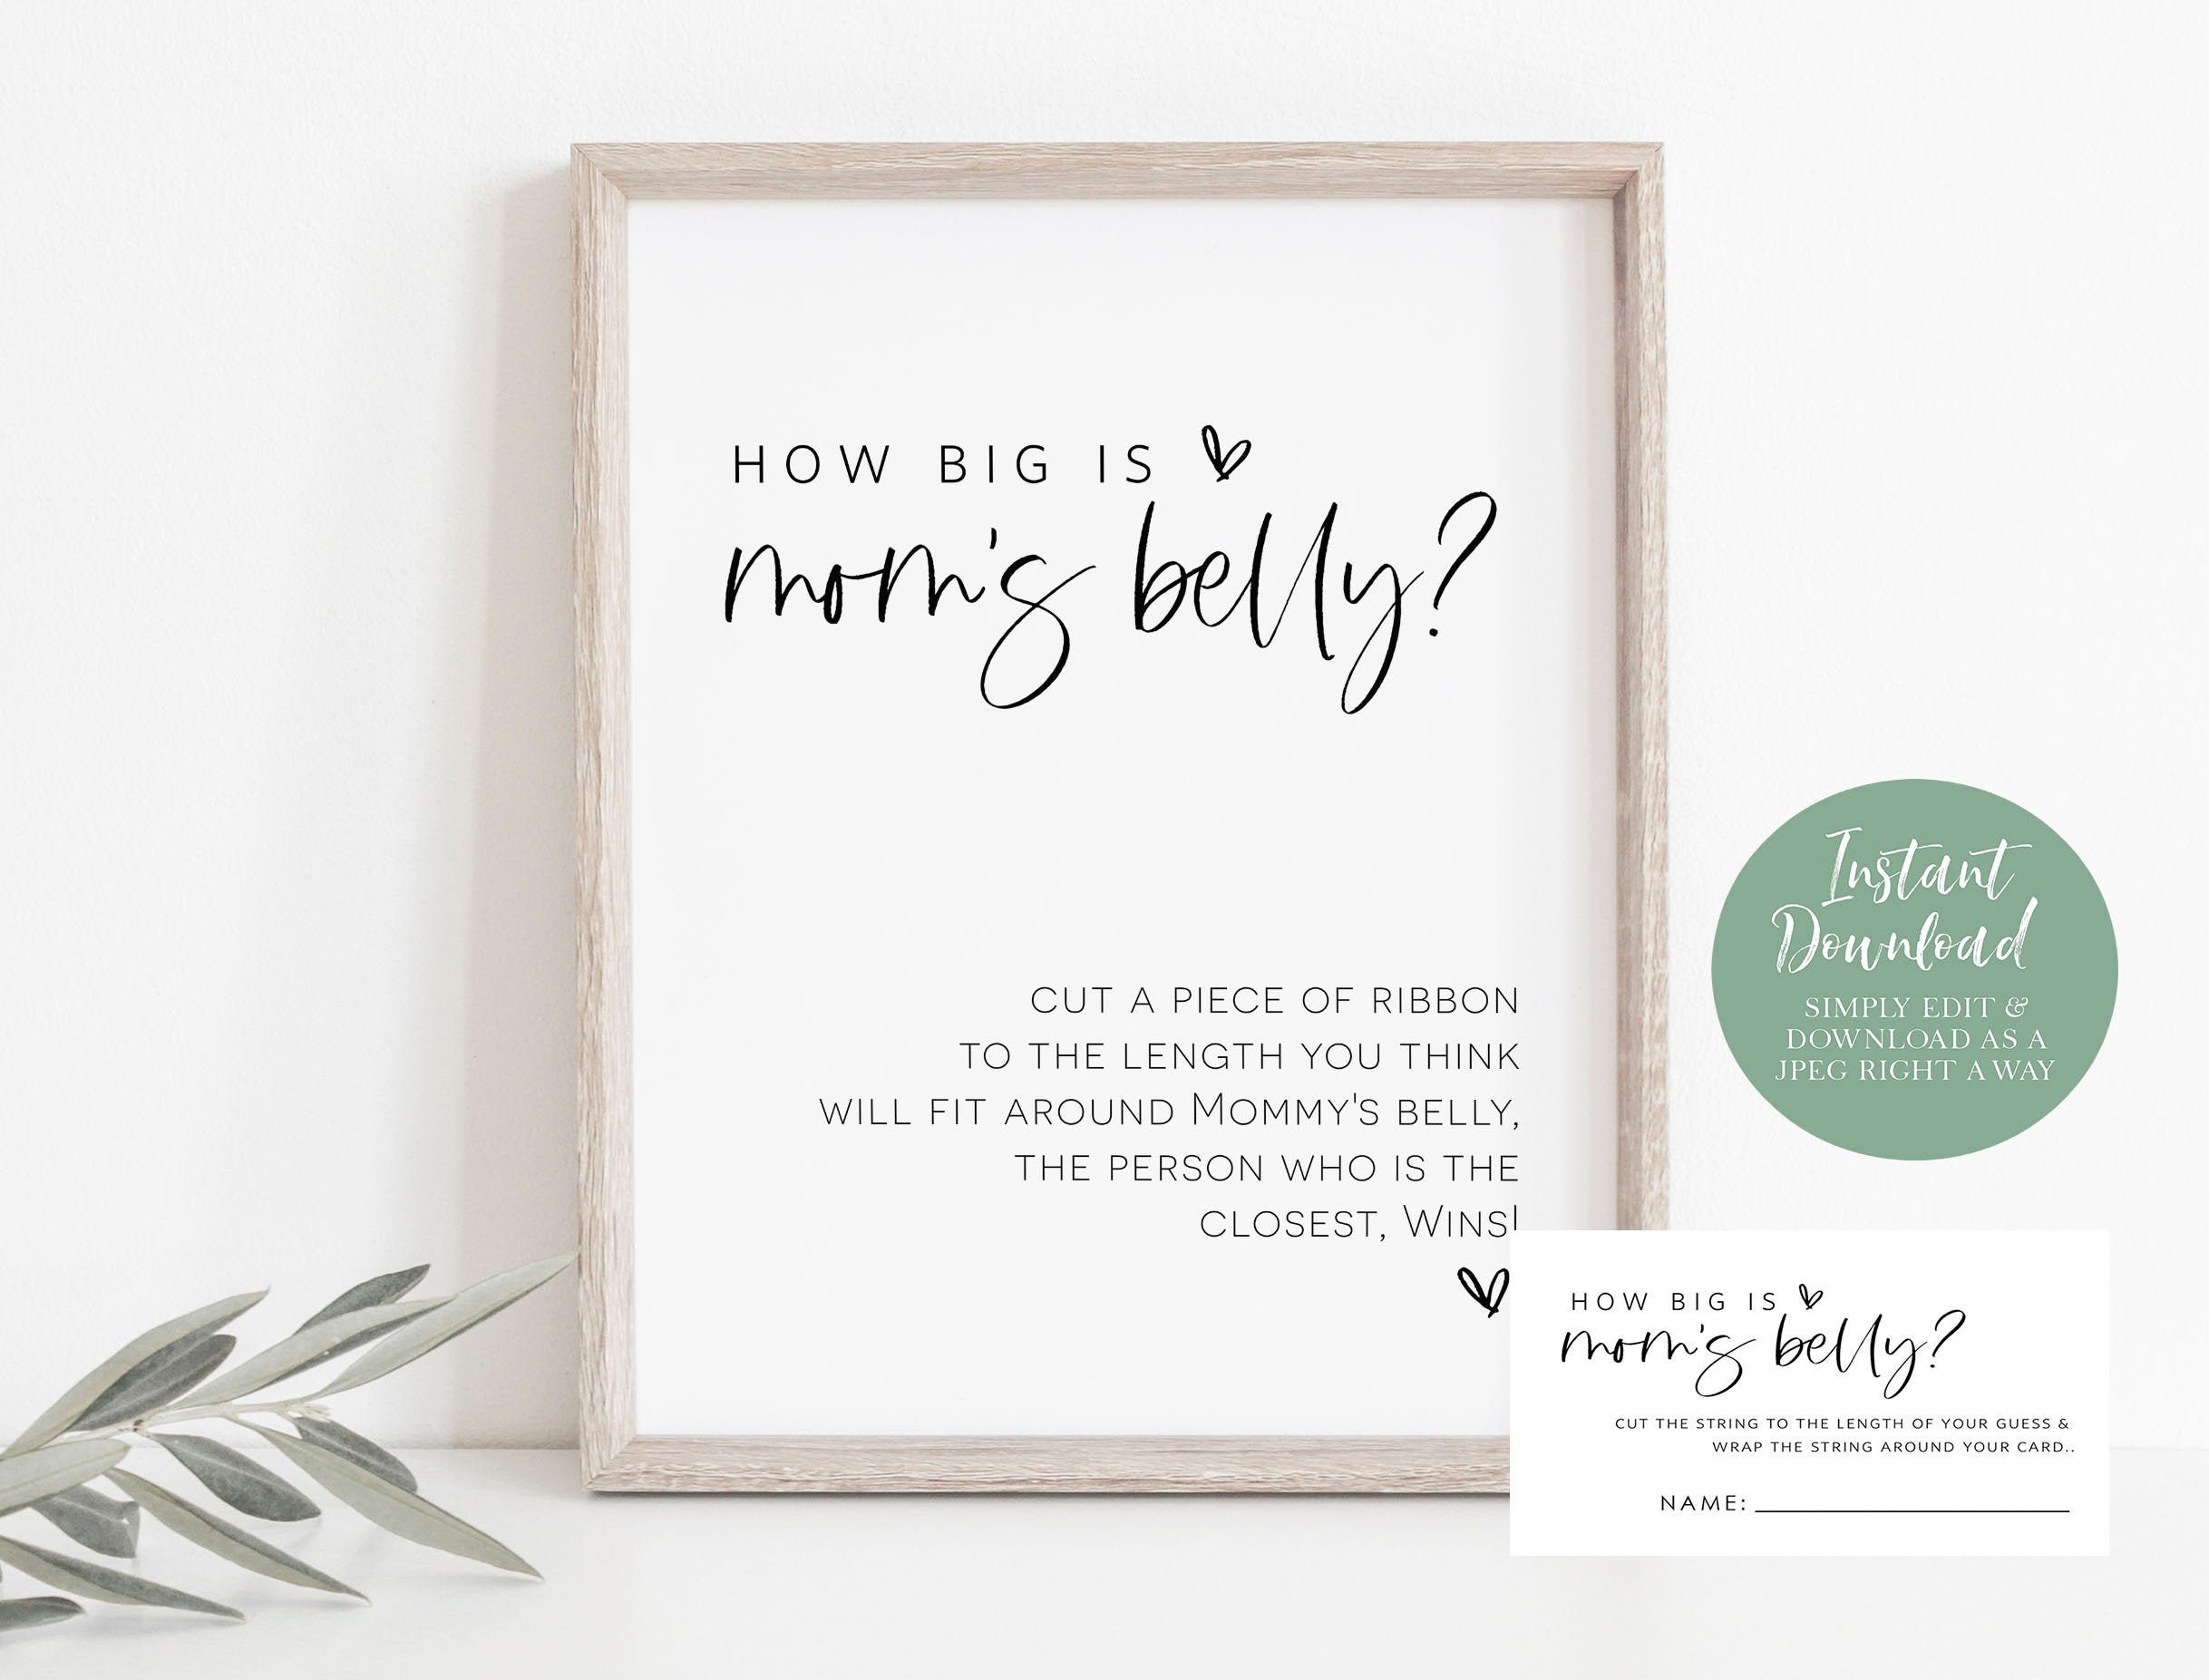 how-big-is-mommy-s-belly-50-count-measure-mom-s-belly-baby-shower